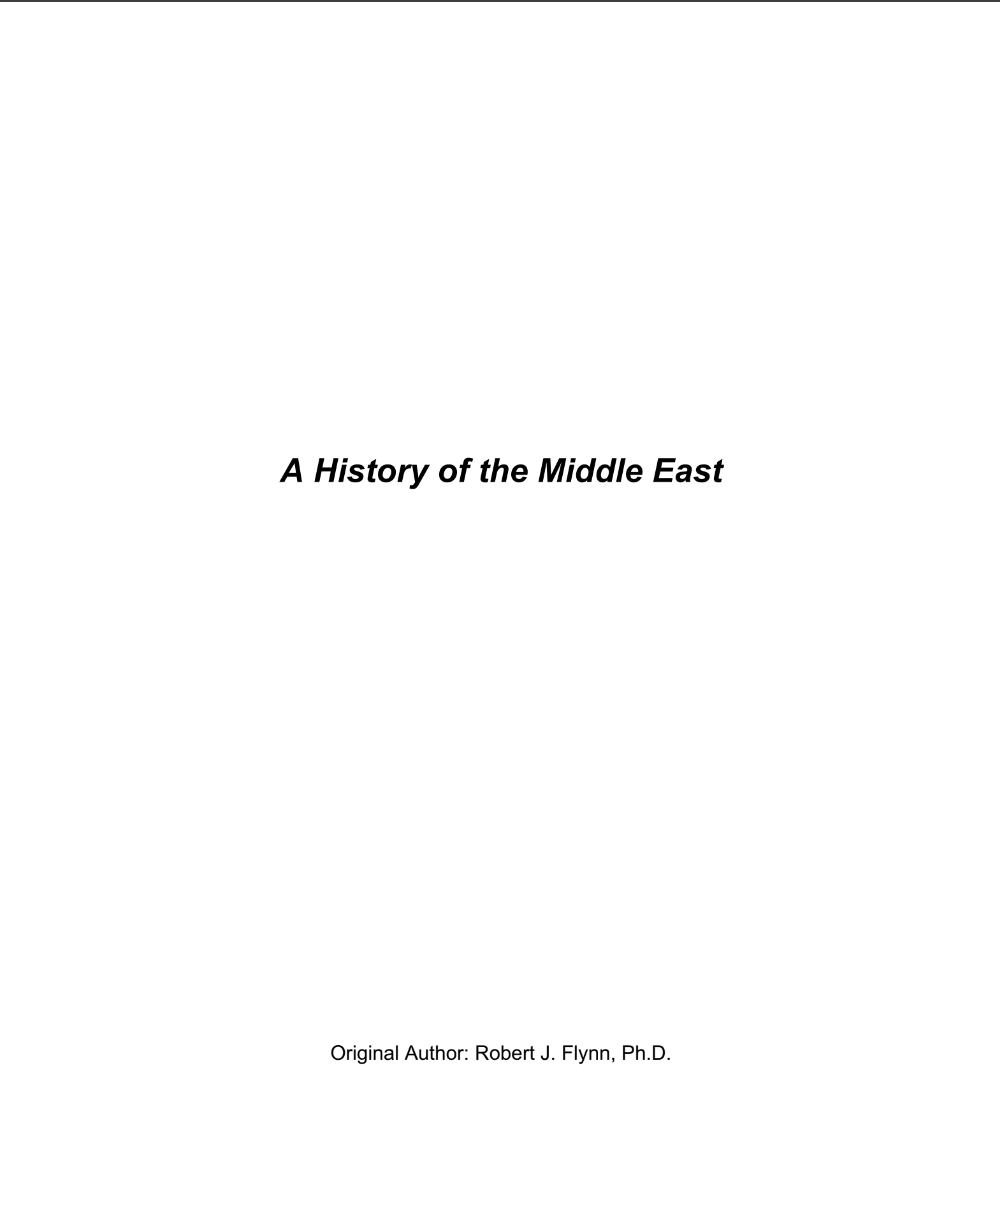 Read more about A History of the Middle East